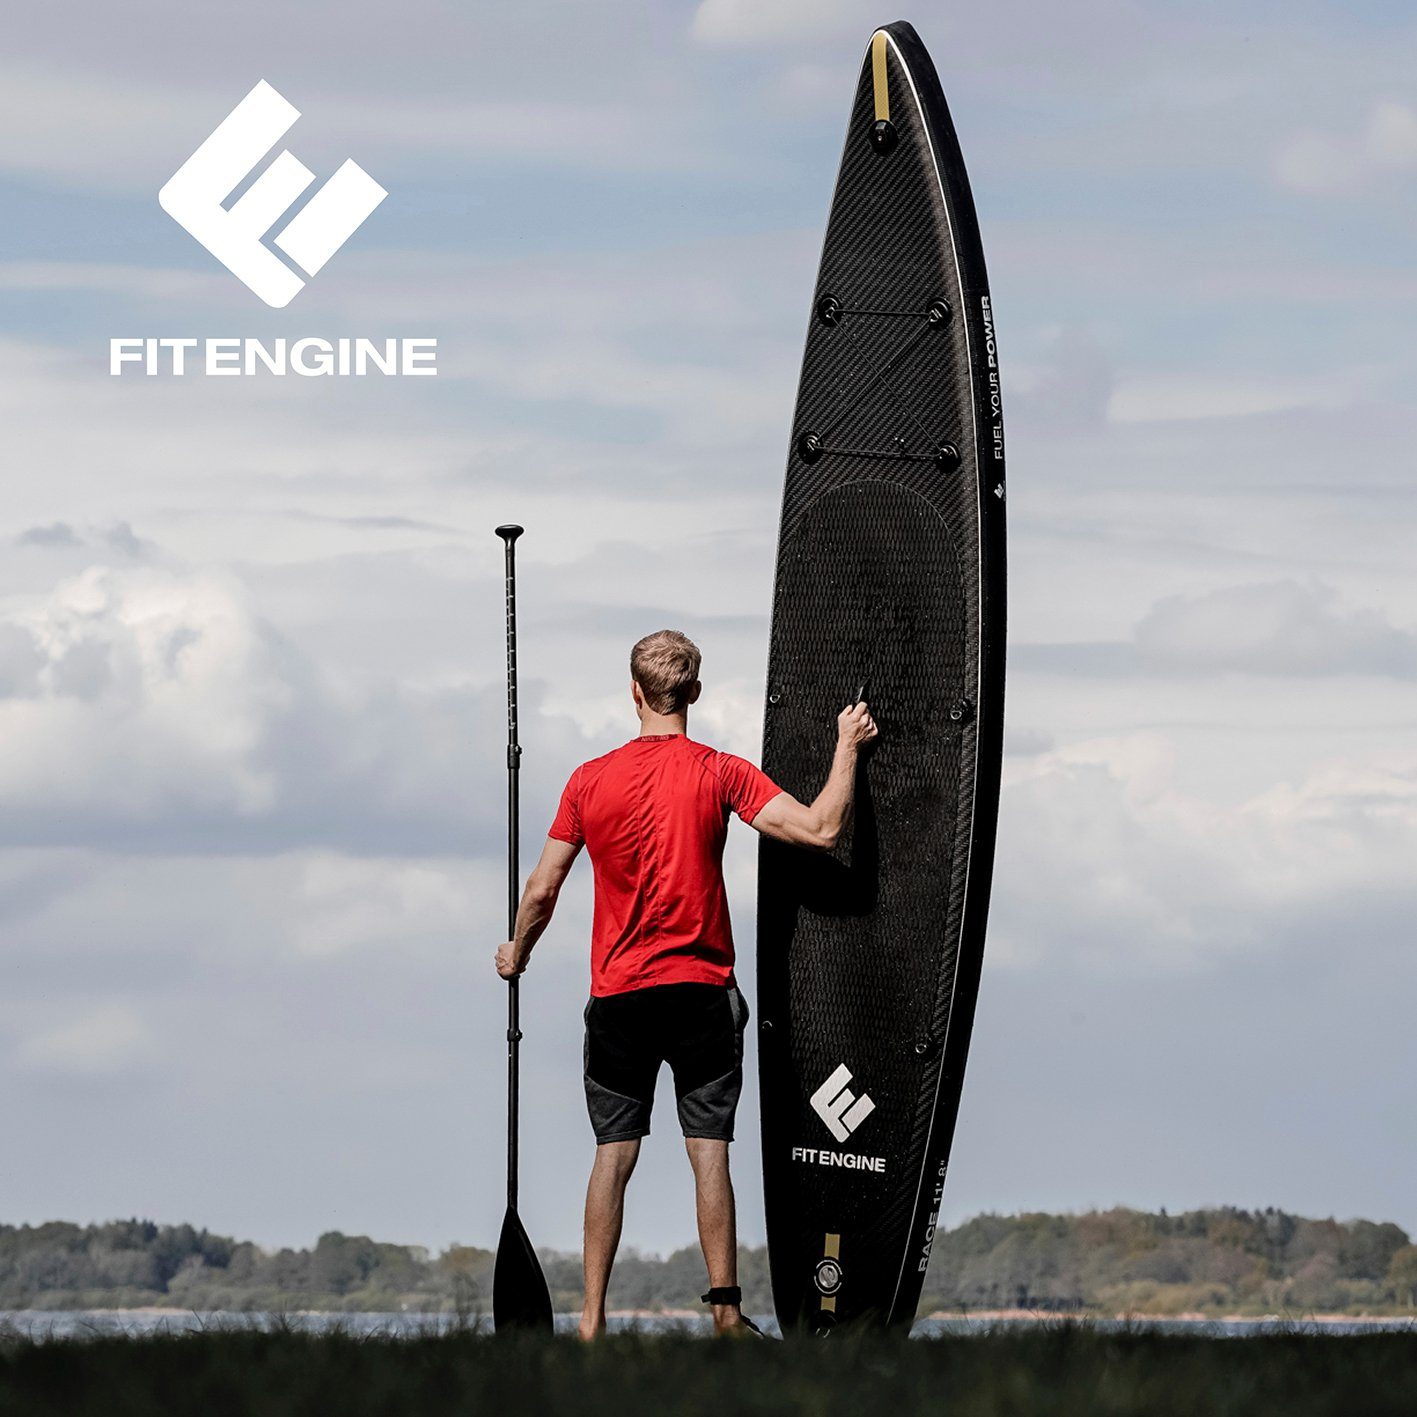 Sport Boards FitEngine Inflatable SUP-Board Stand-up Paddle Board - Race SUP-Board Set (Touring) – 11‘8 360cm - schwarz